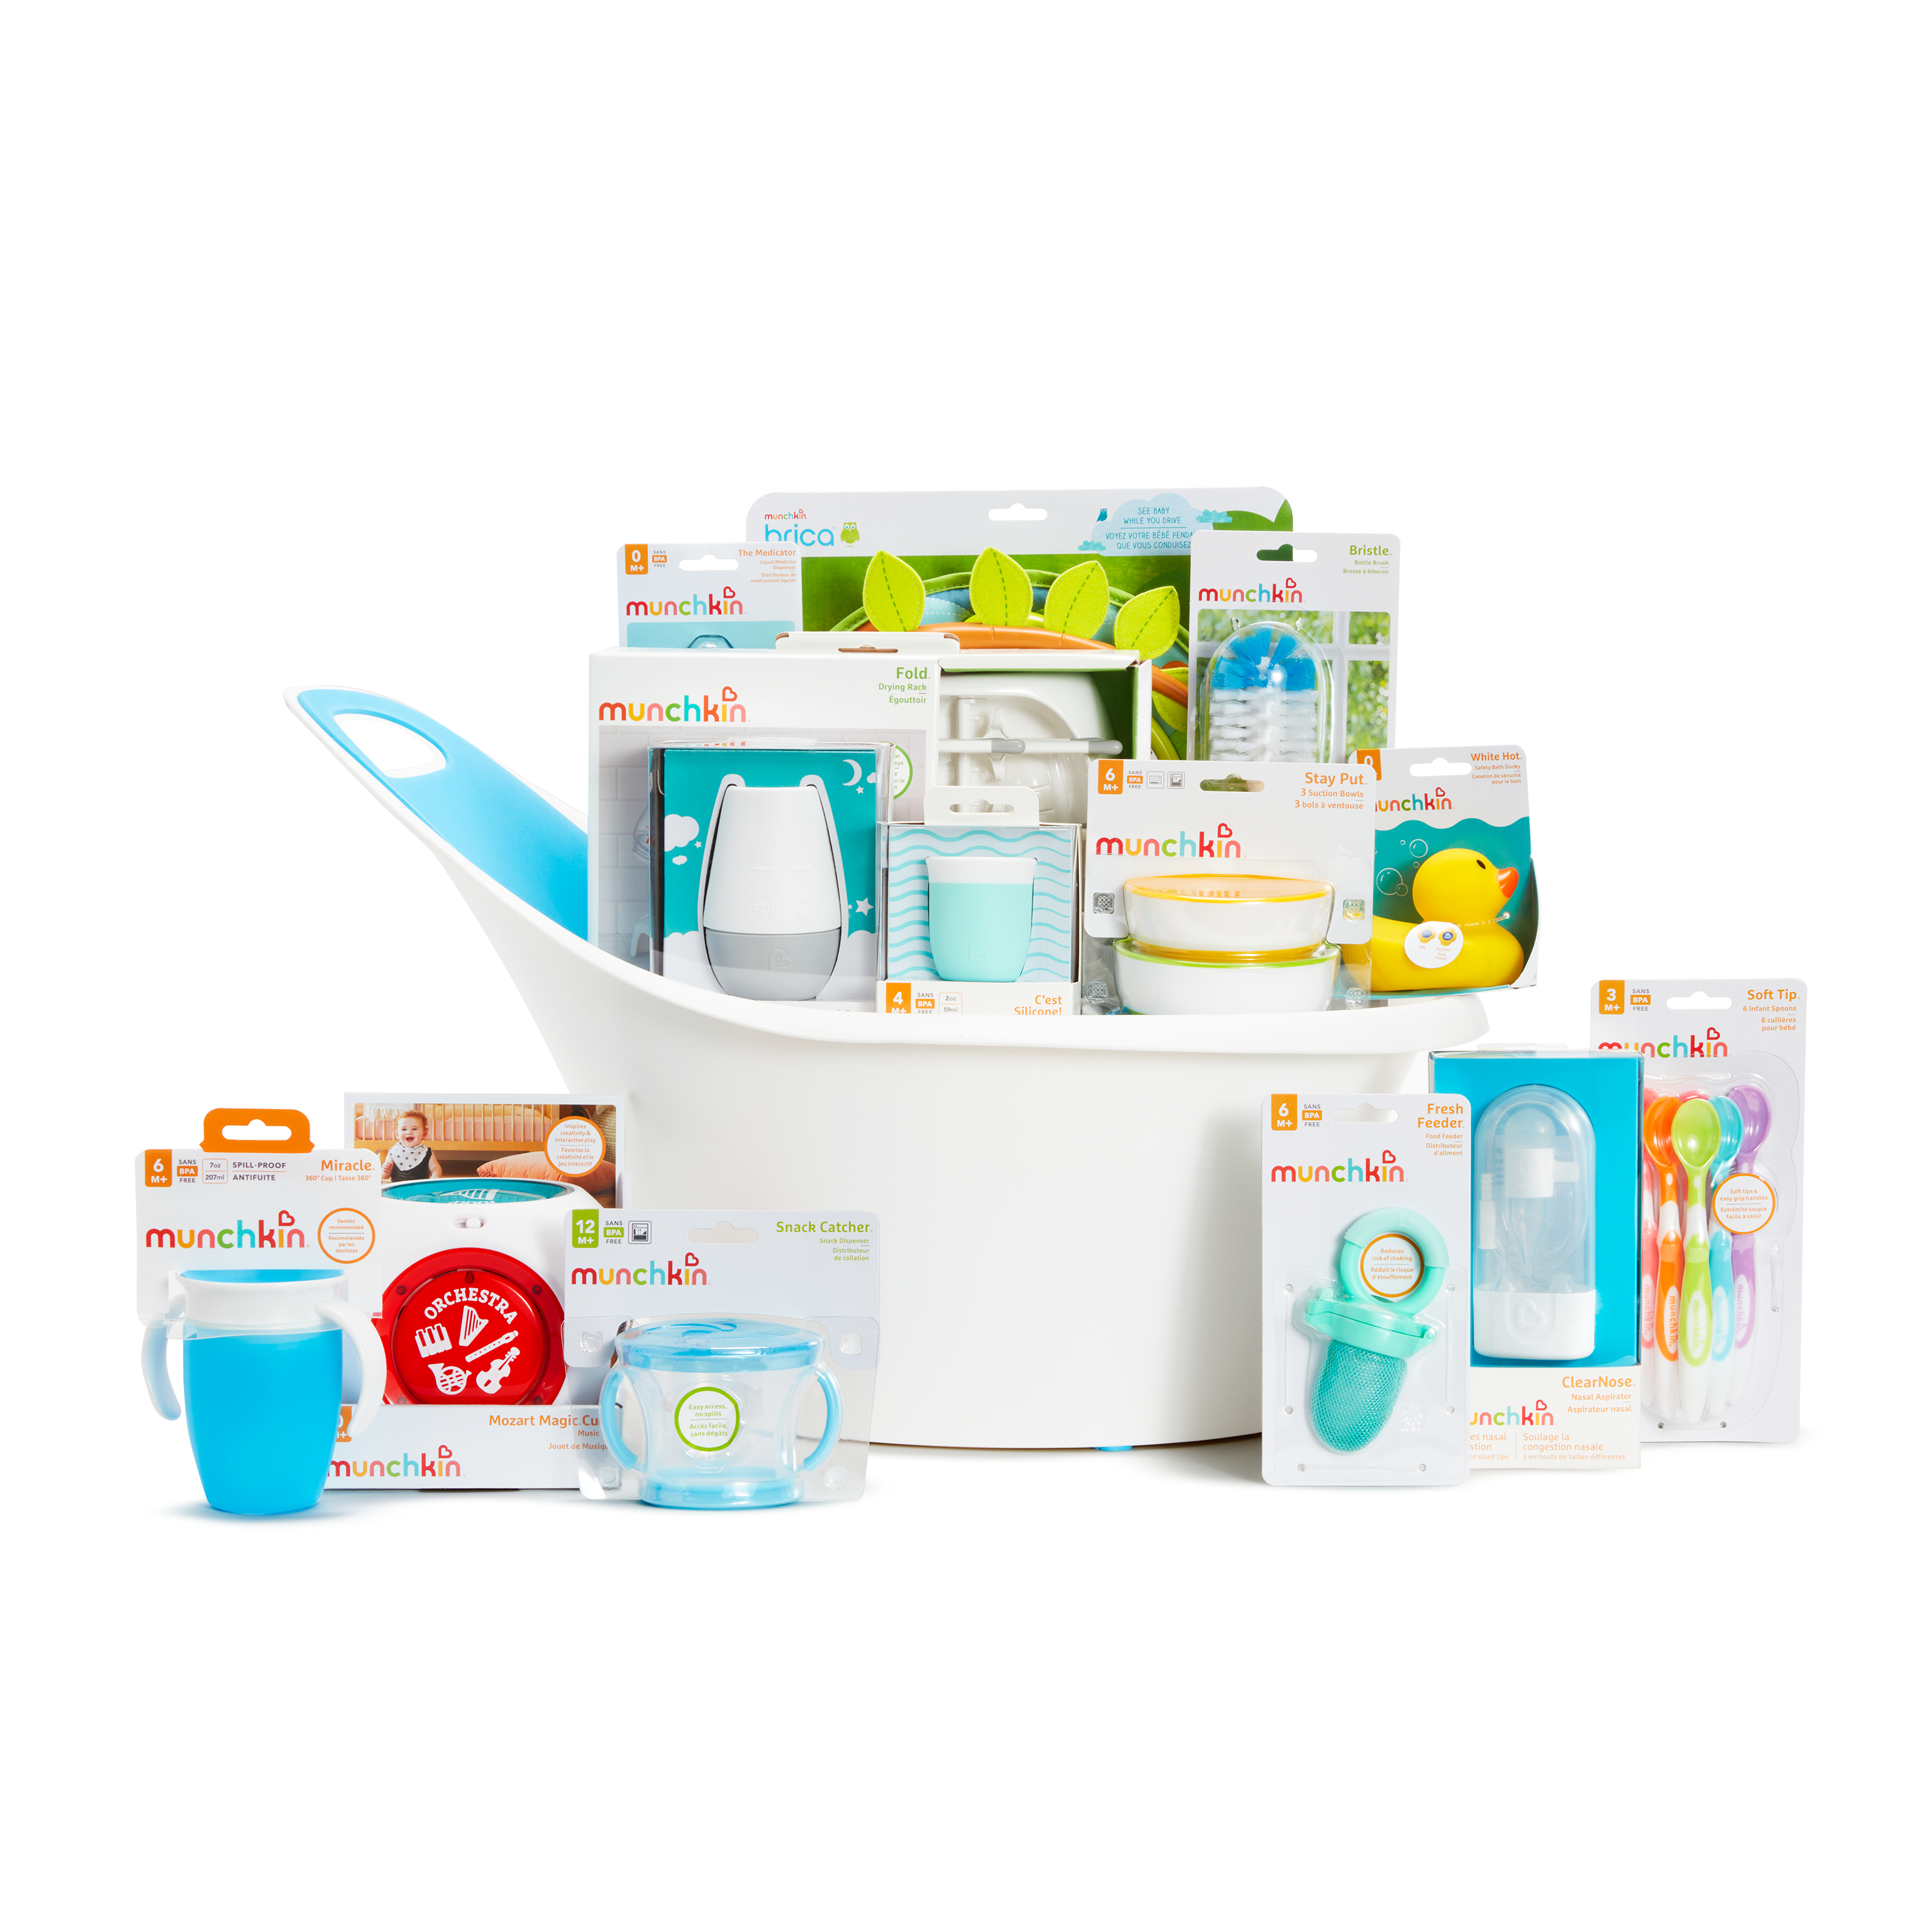 Munchkin® My Munchkin Gift Basket, Great for Baby Showers, Includes 15 Baby Products, Blue, Unisex - image 1 of 29